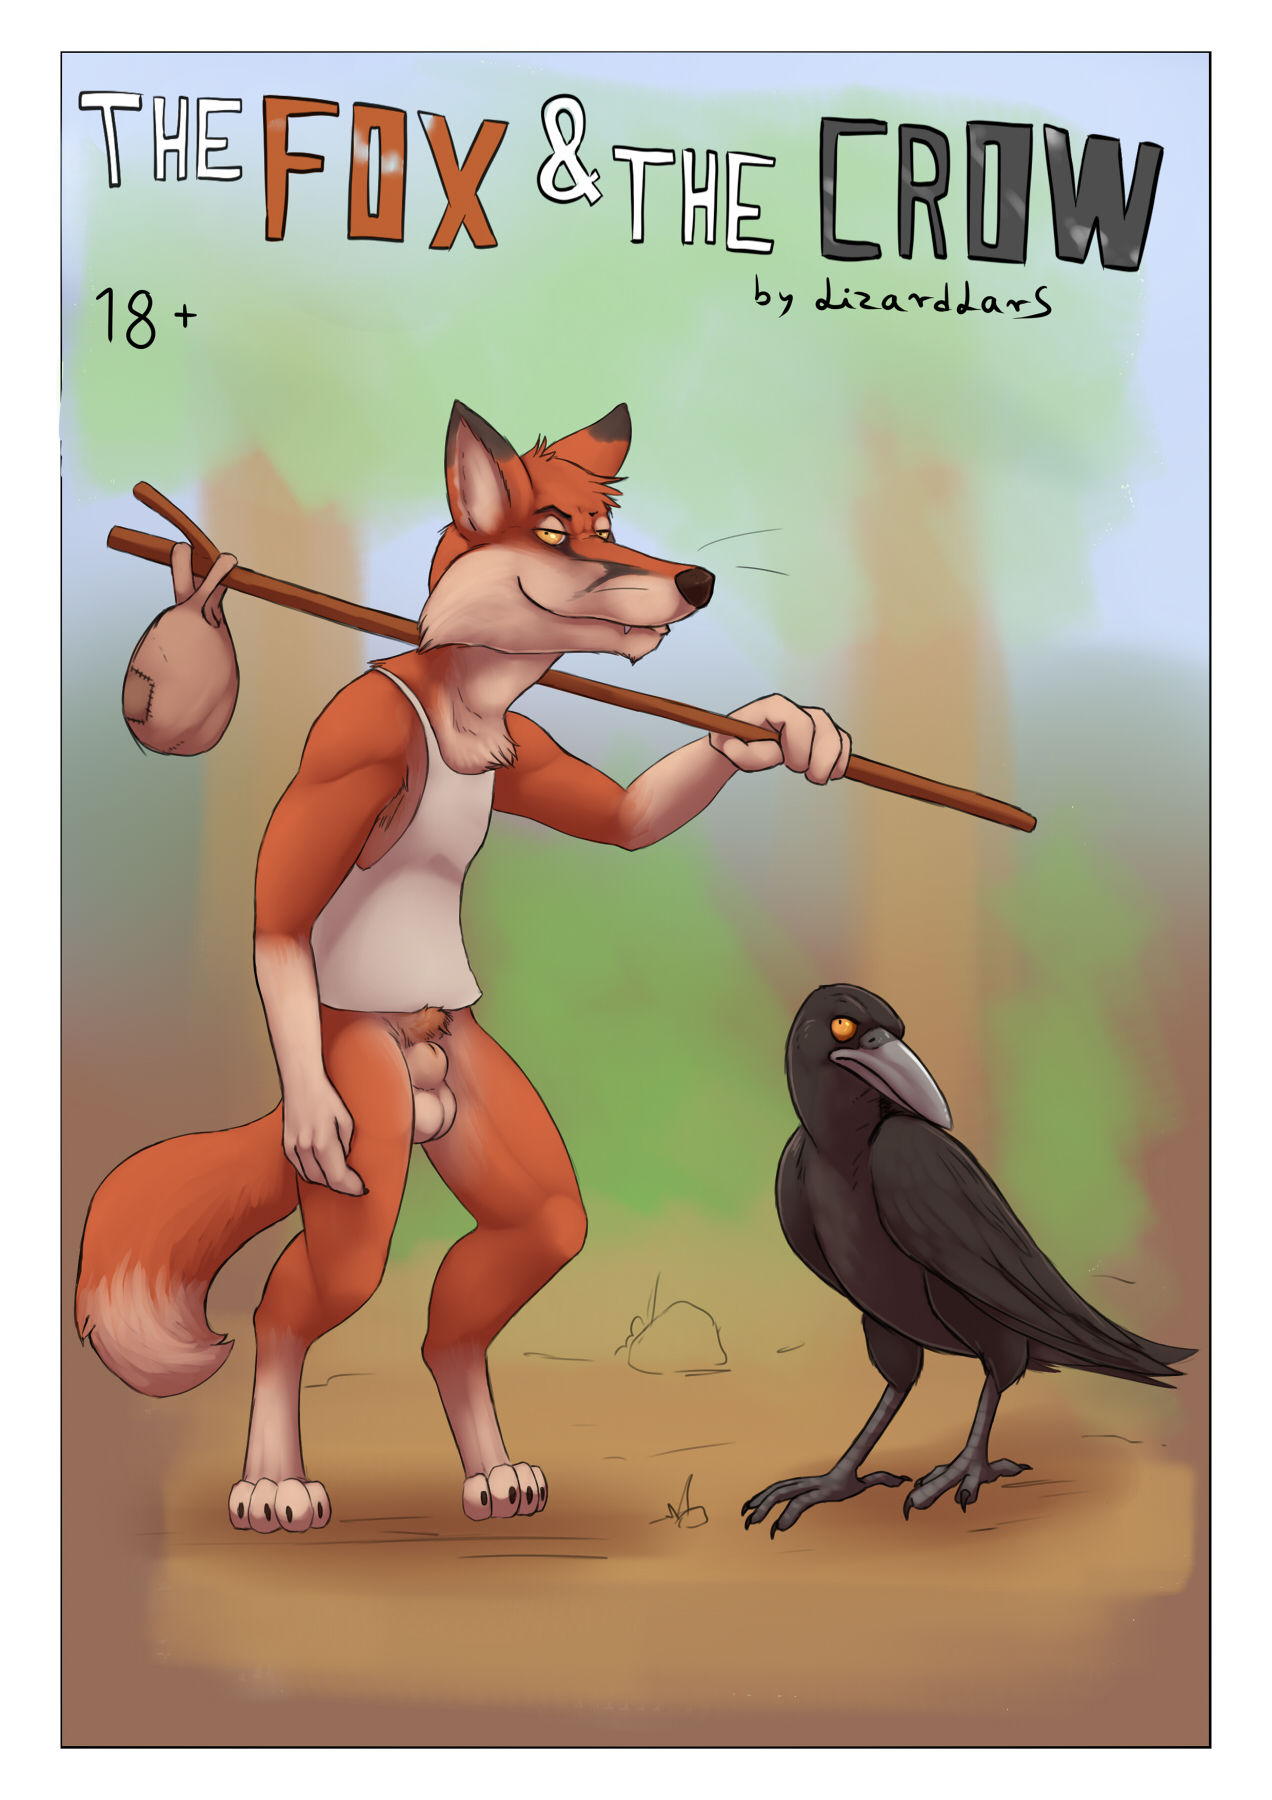 The fox and the crow porn comic